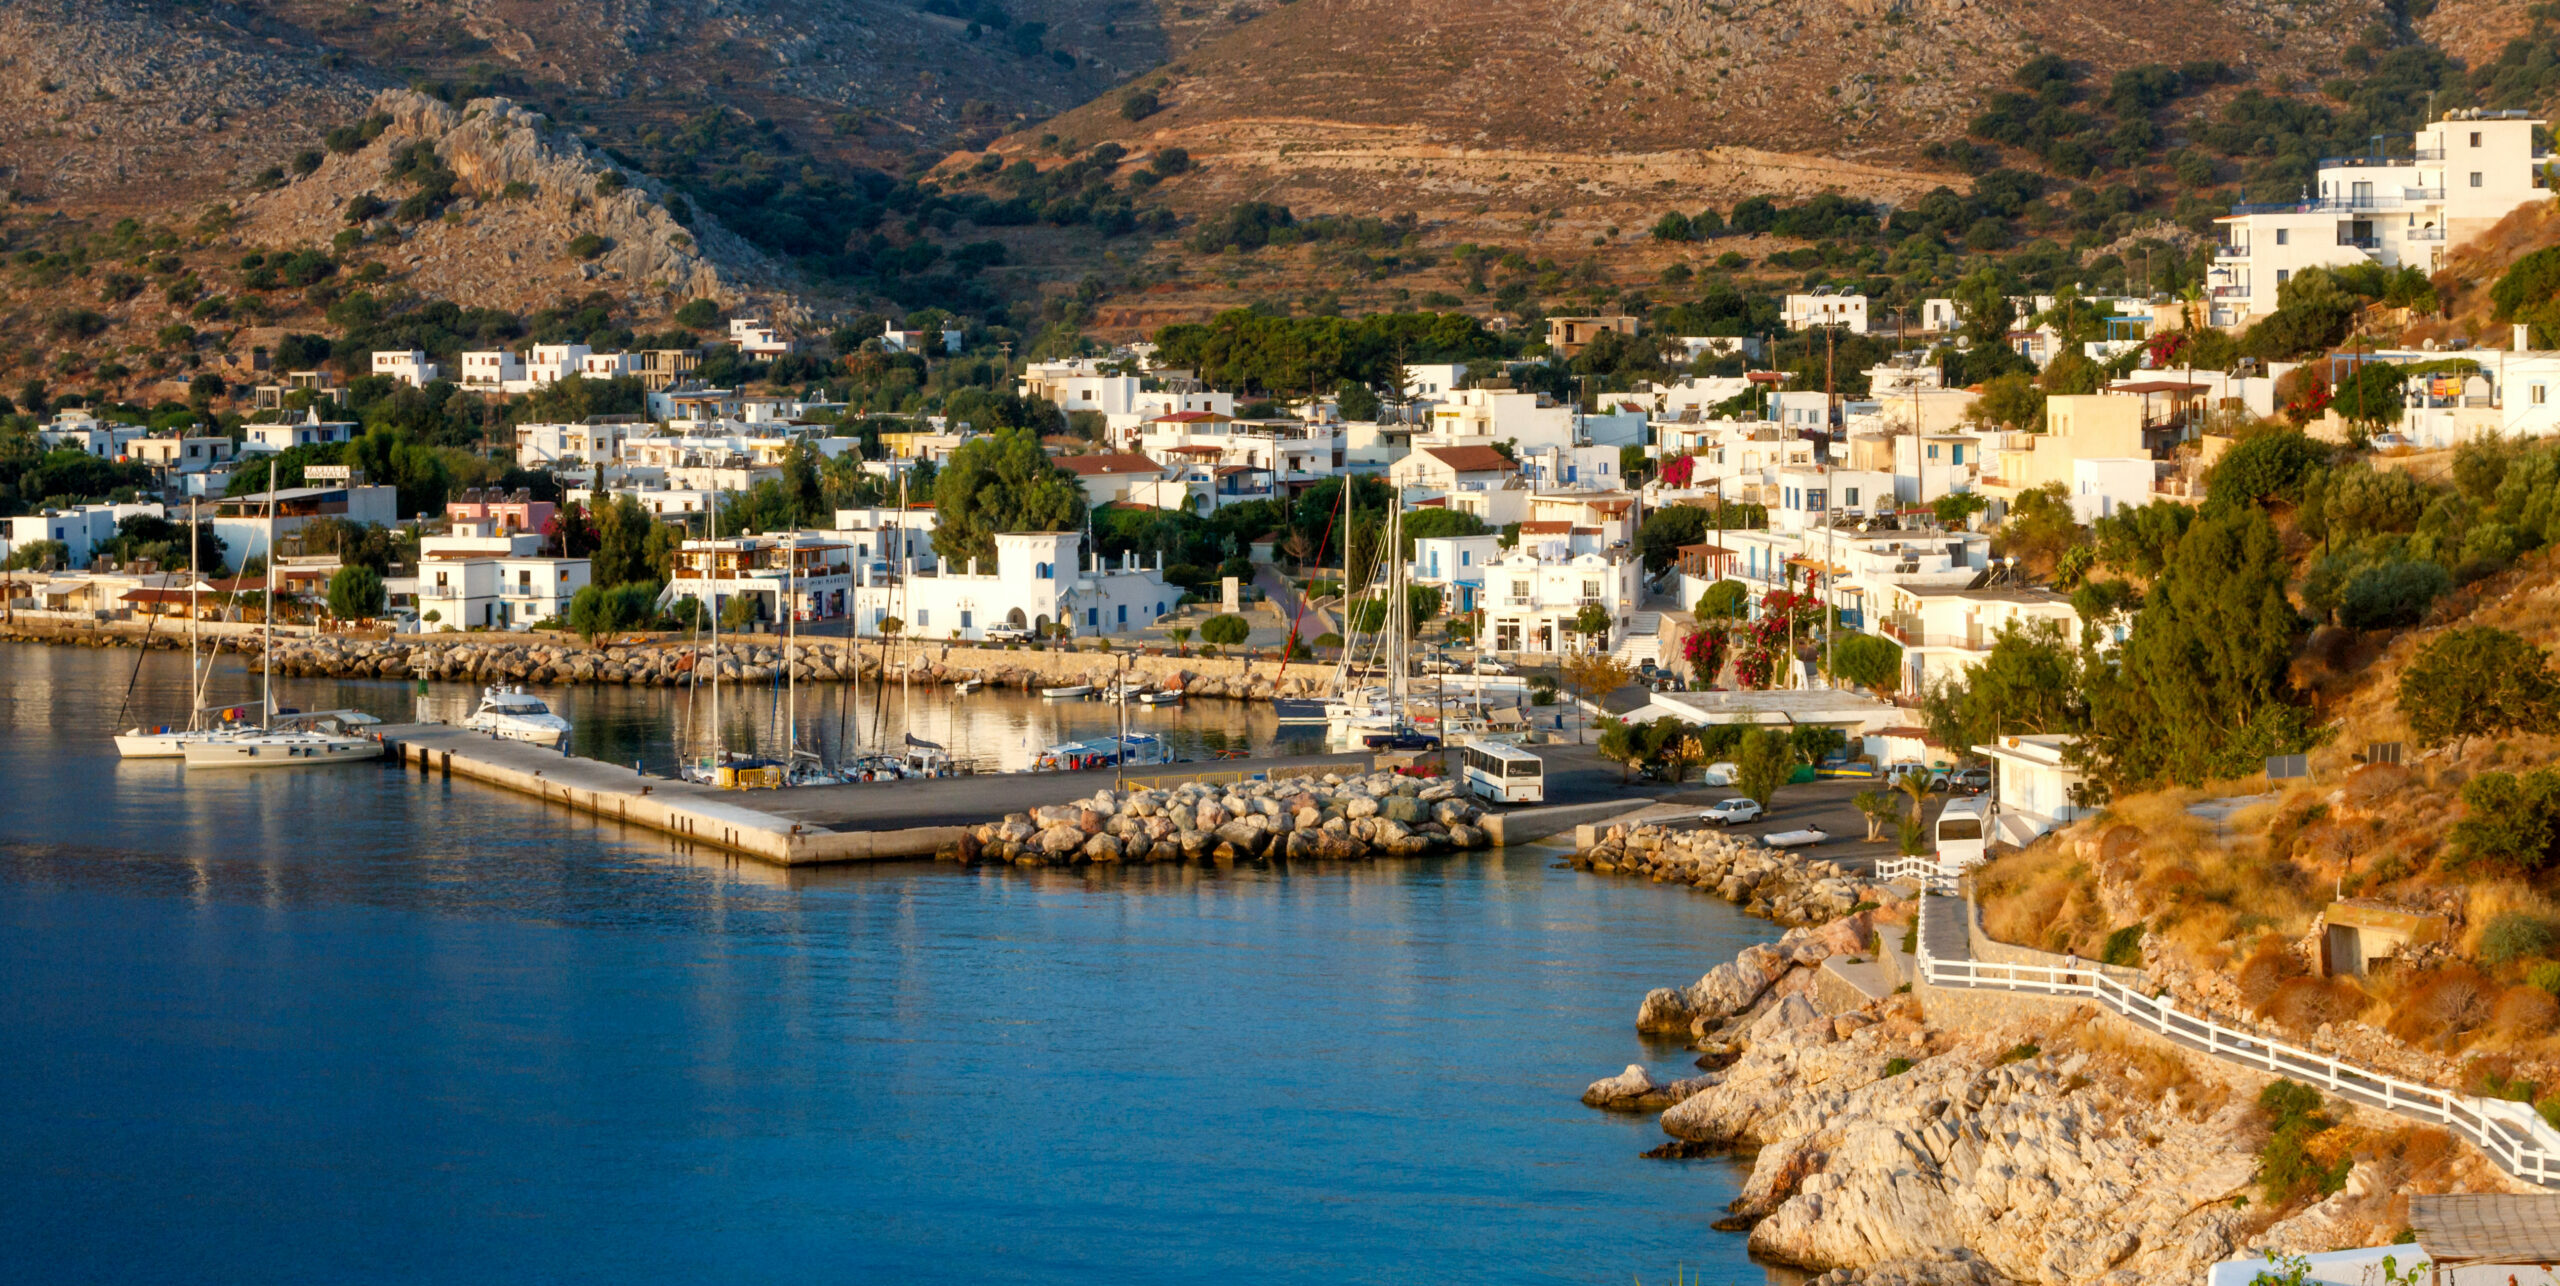 Tilos: What you don’t know about the quiet emerald island of the Aegean Sea